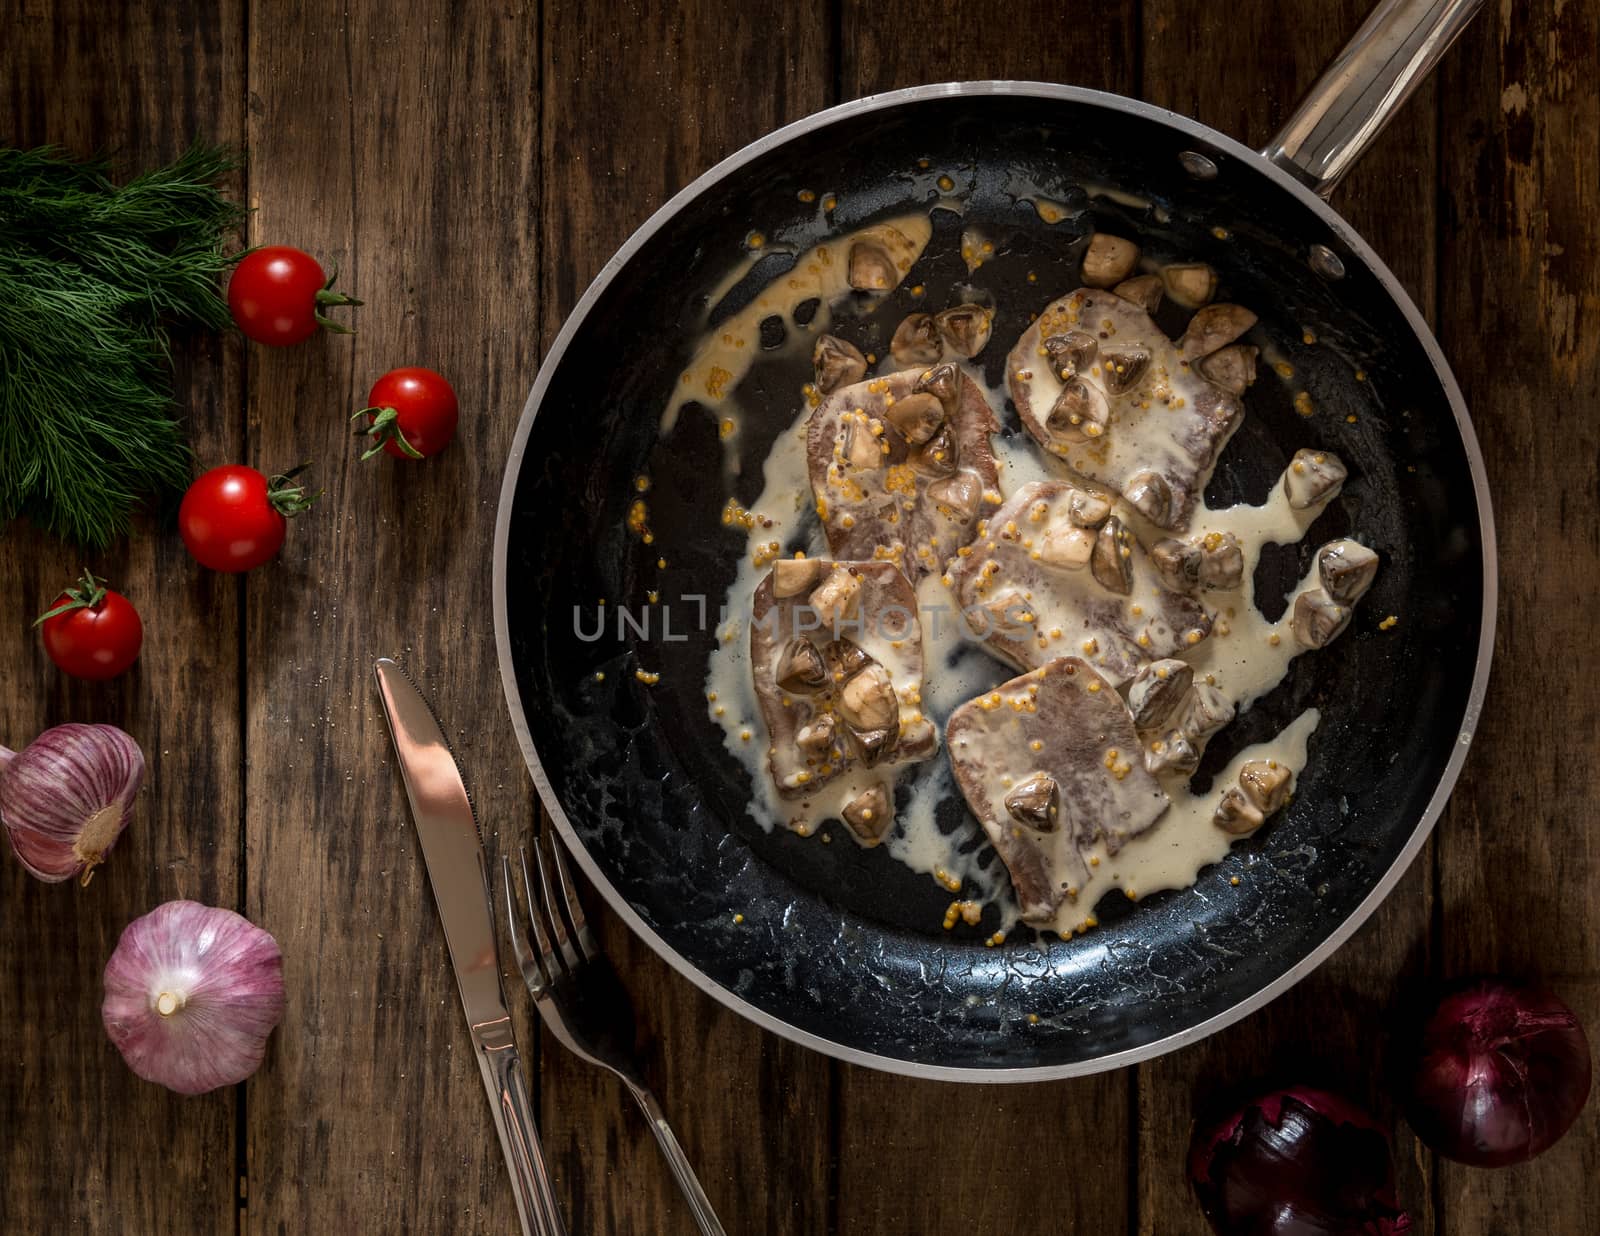 fried the meat and mushrooms seasoned with gravy in the pan on wooden background, top view